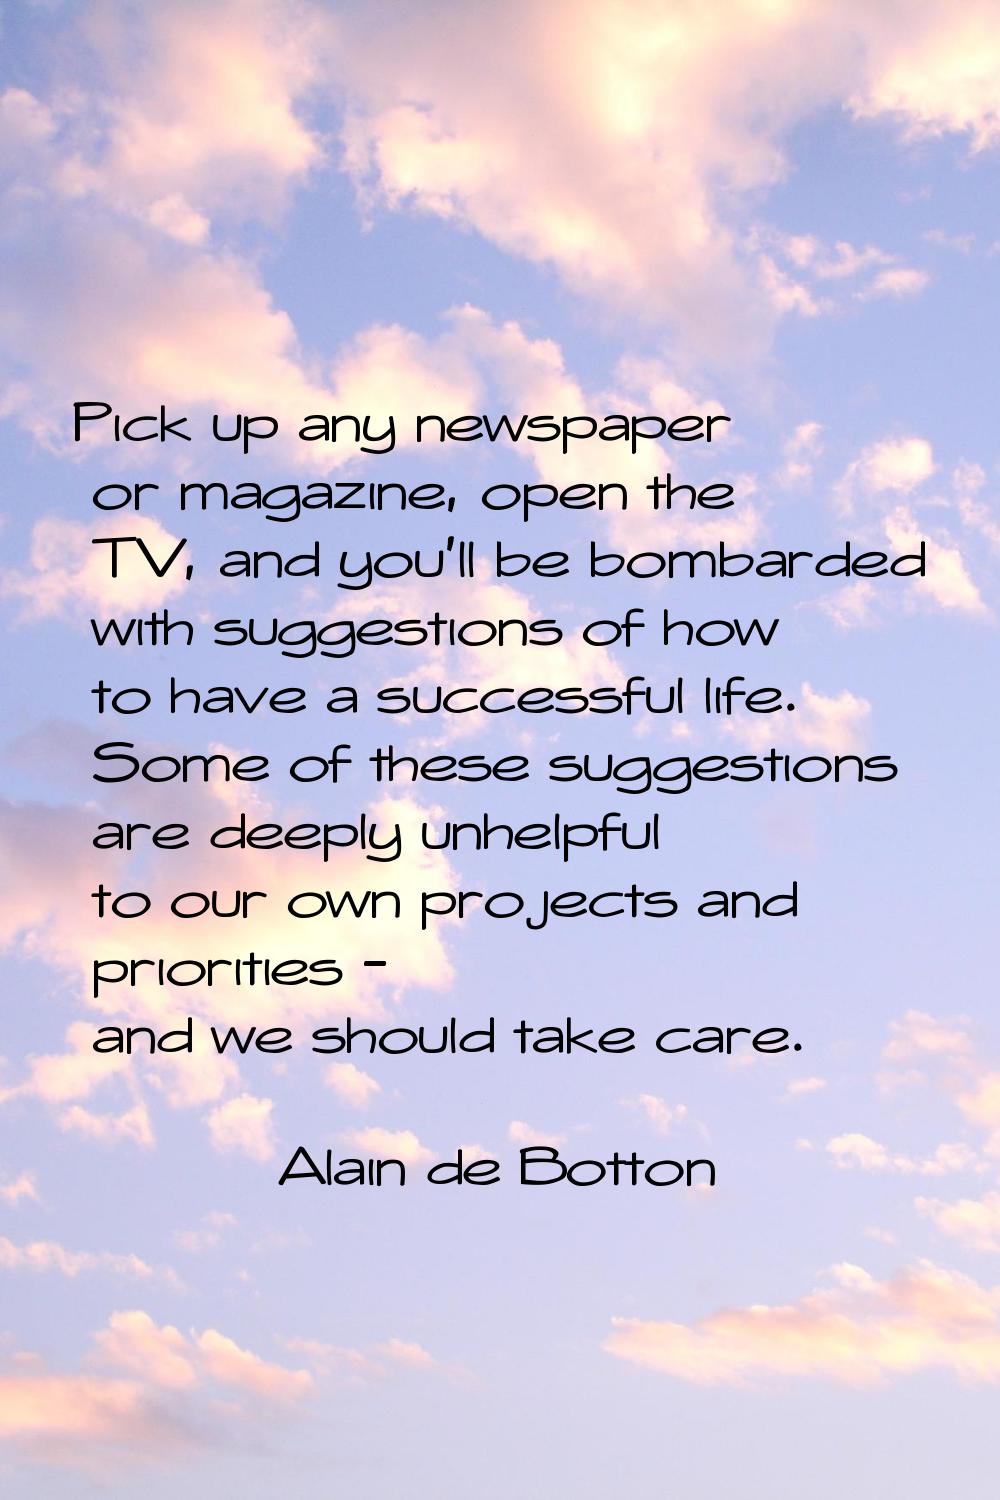 Pick up any newspaper or magazine, open the TV, and you'll be bombarded with suggestions of how to 